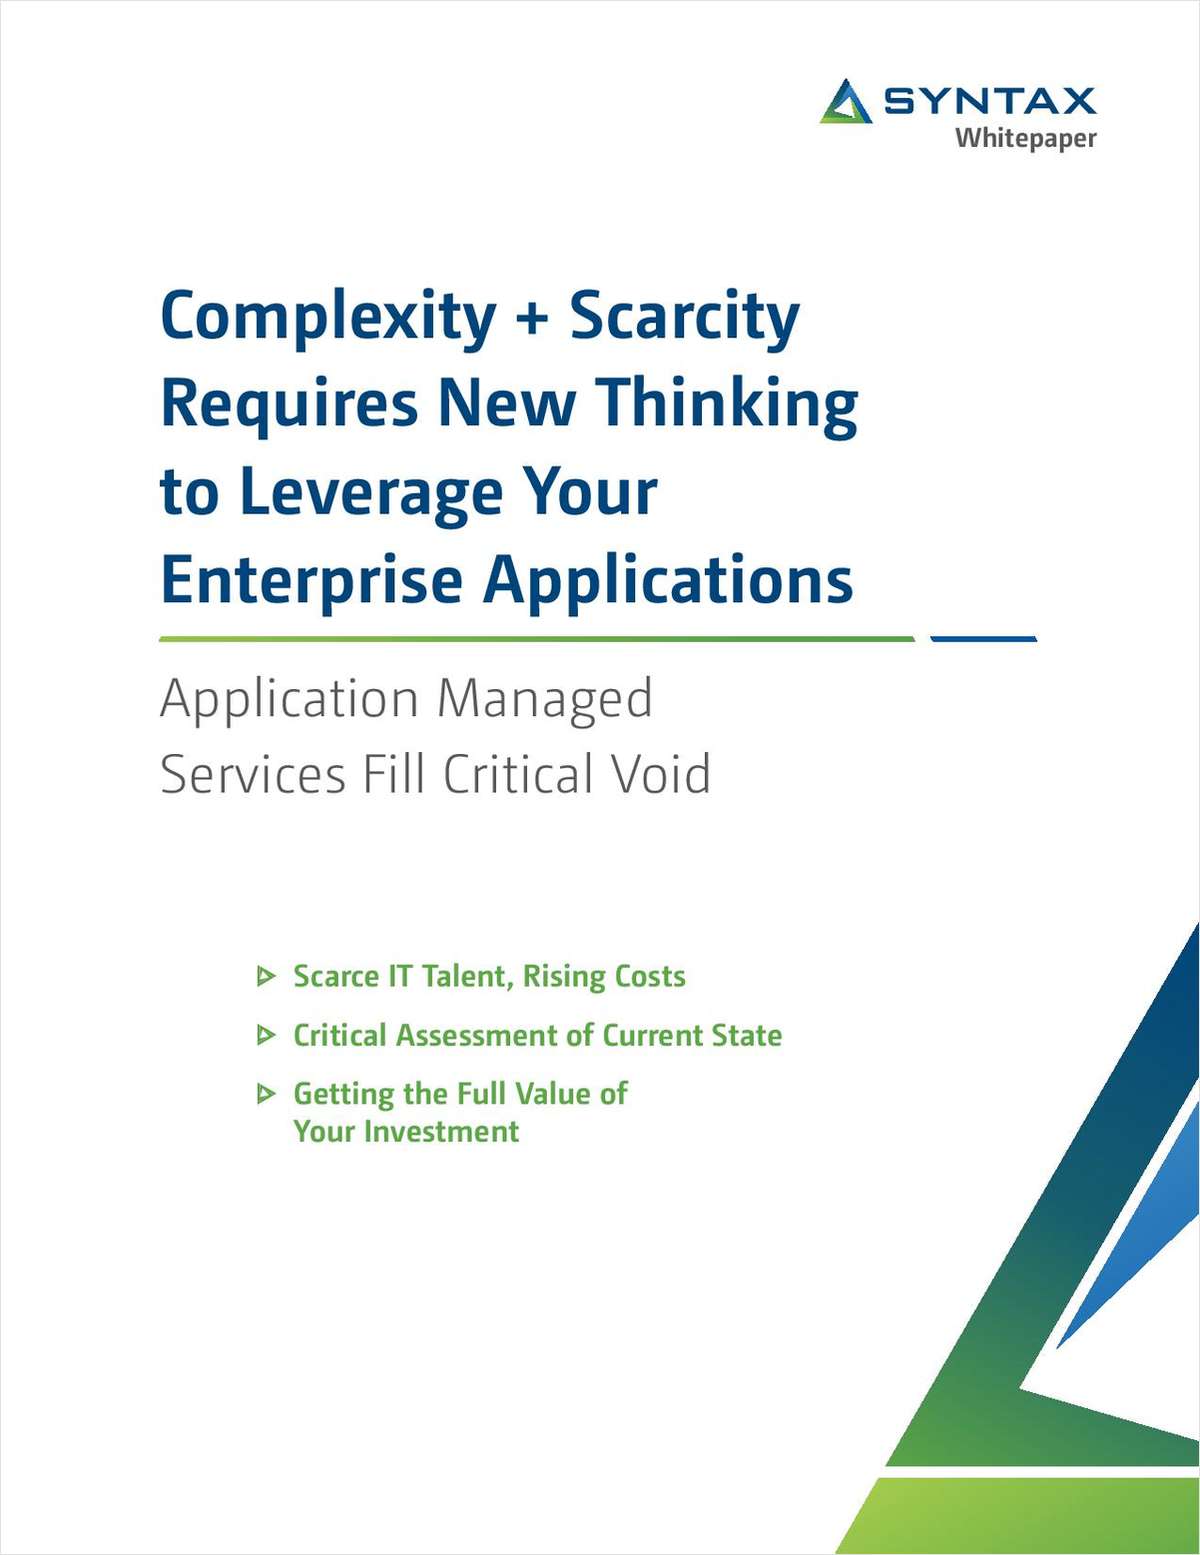 Complexity + Scarcity Requires New Thinking to Leverage Your Enterprise Applications: Application Managed Services Fill Critical Void